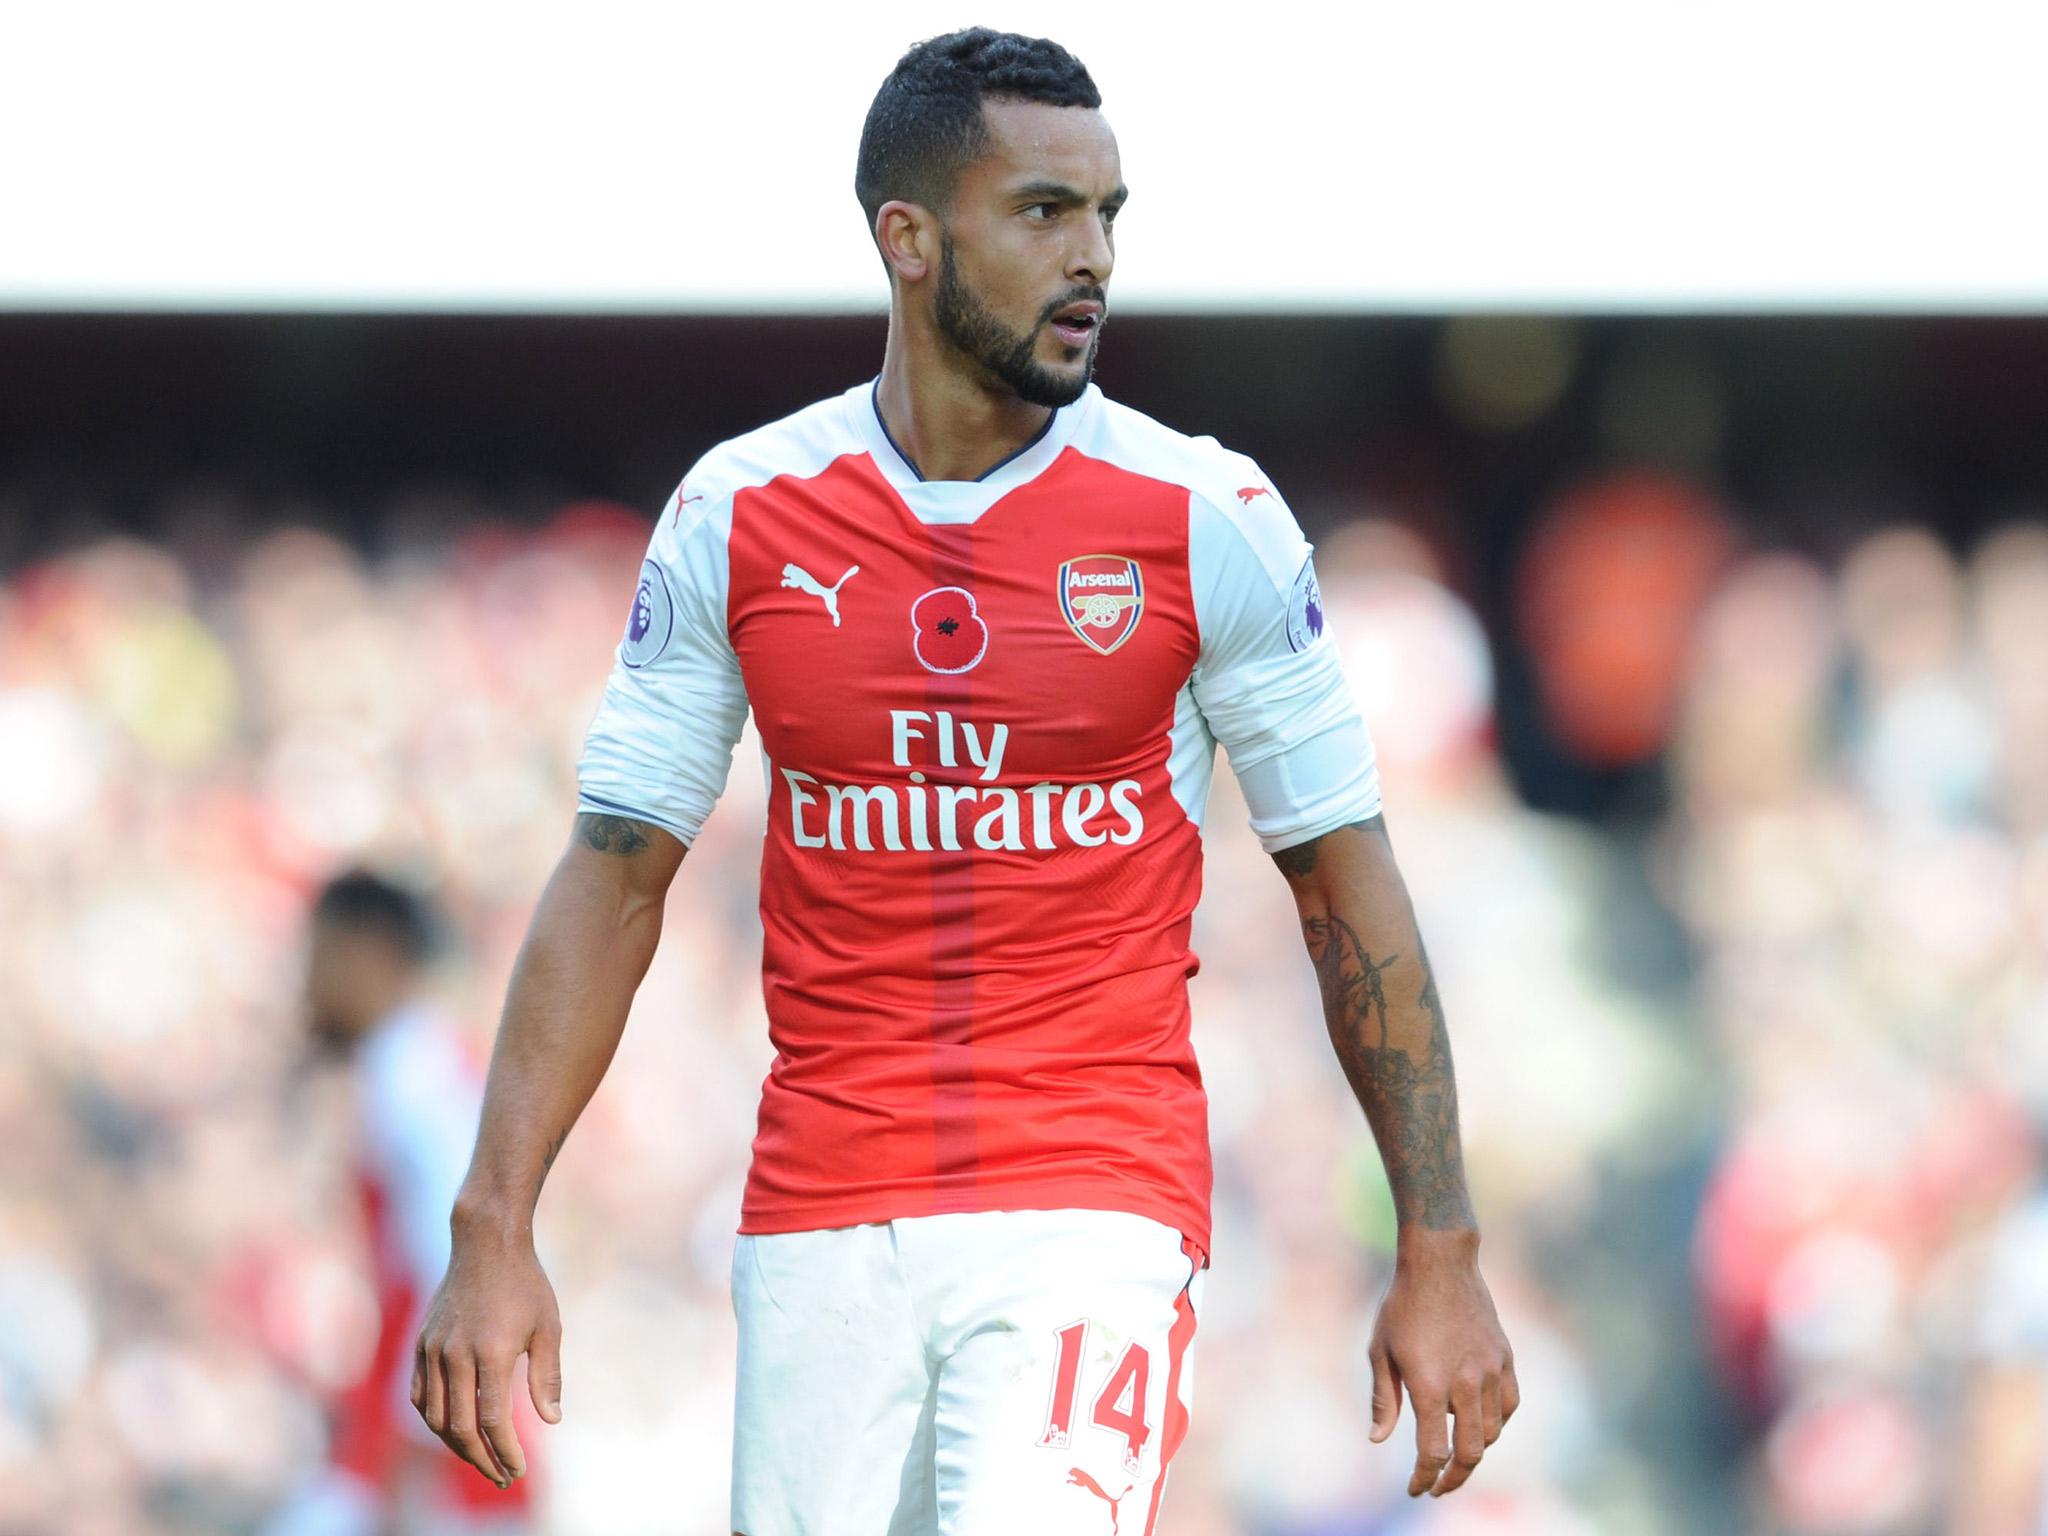 Theo Walcott said he was taken by surprise during the north London derby after Spurs switched formations